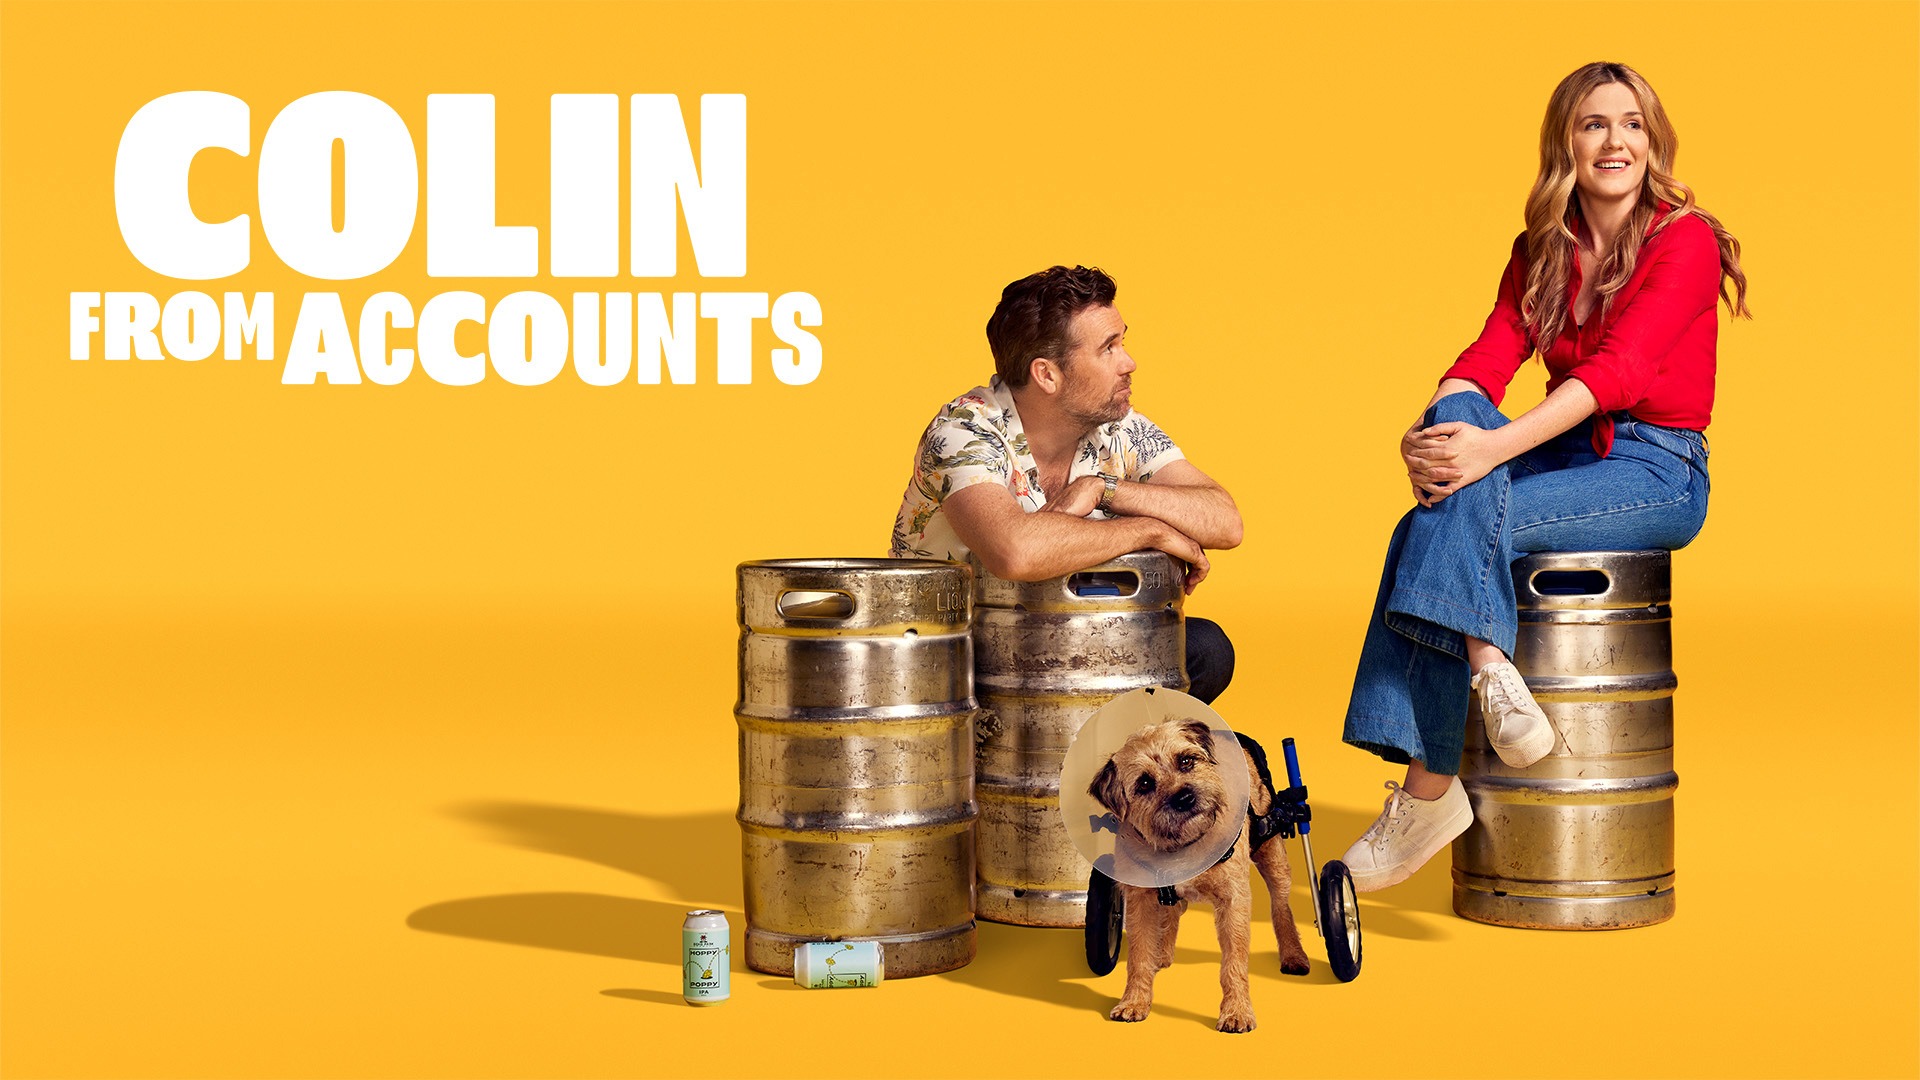 #Colin from Accounts: Paramount+ Unveils Trailer from Australian Comedy Series (Watch)